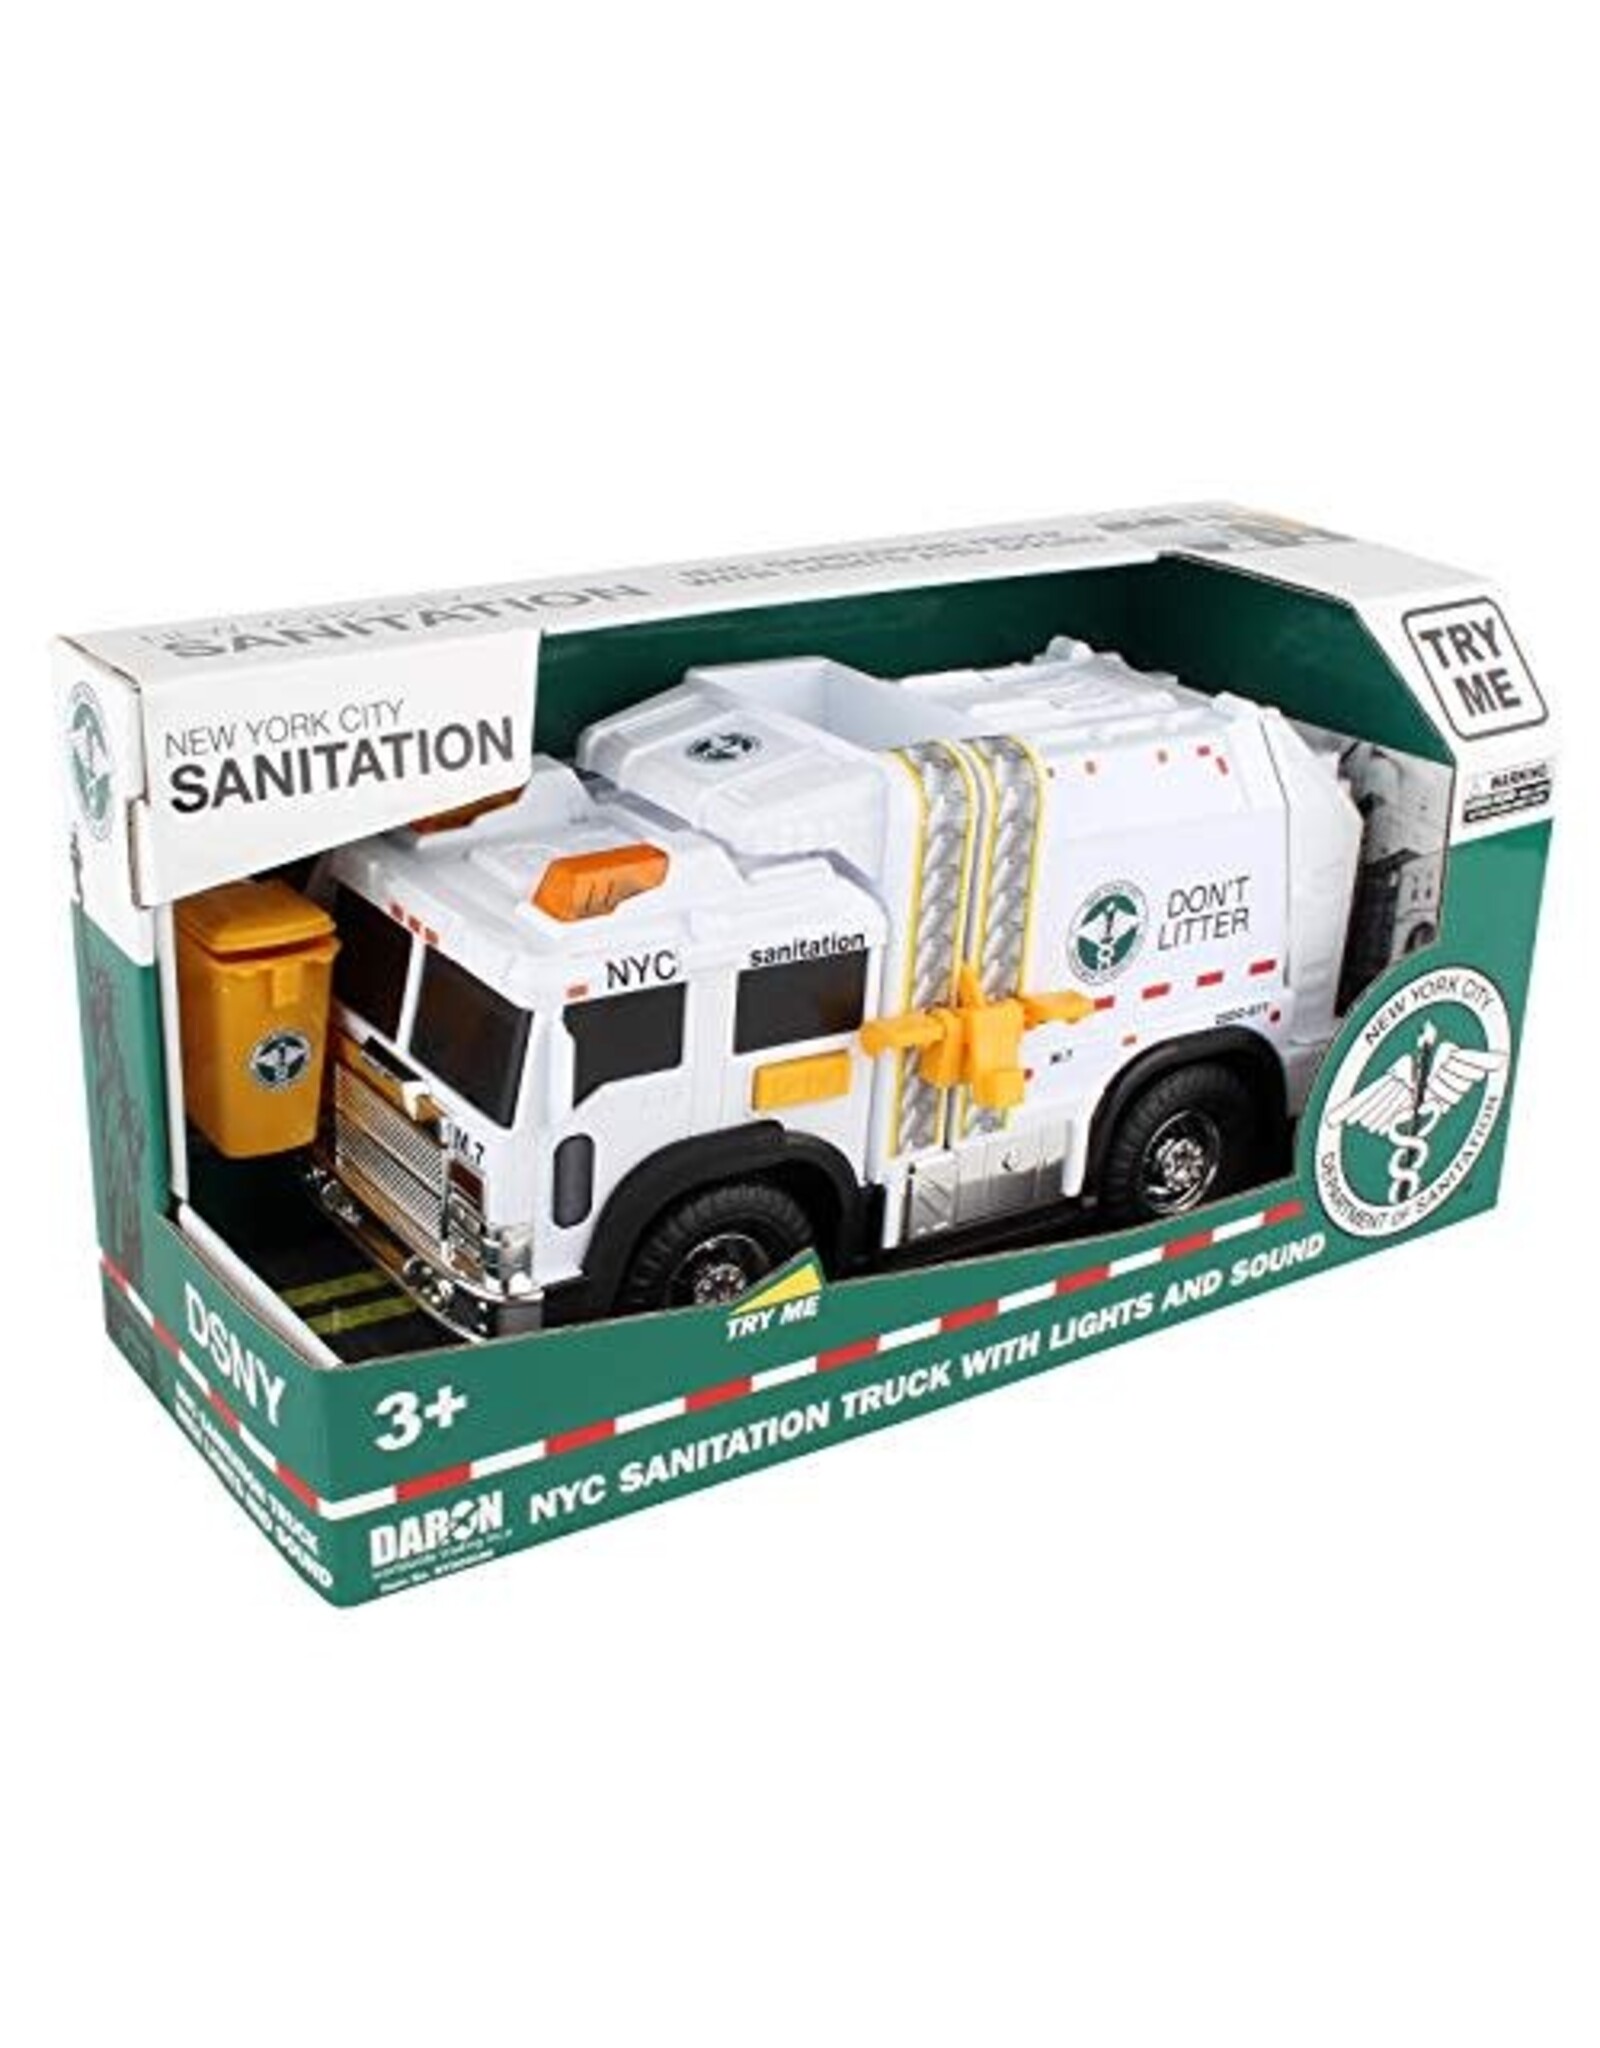 Daron NYC Sanitation Garbage Truck with Lights & Sounds